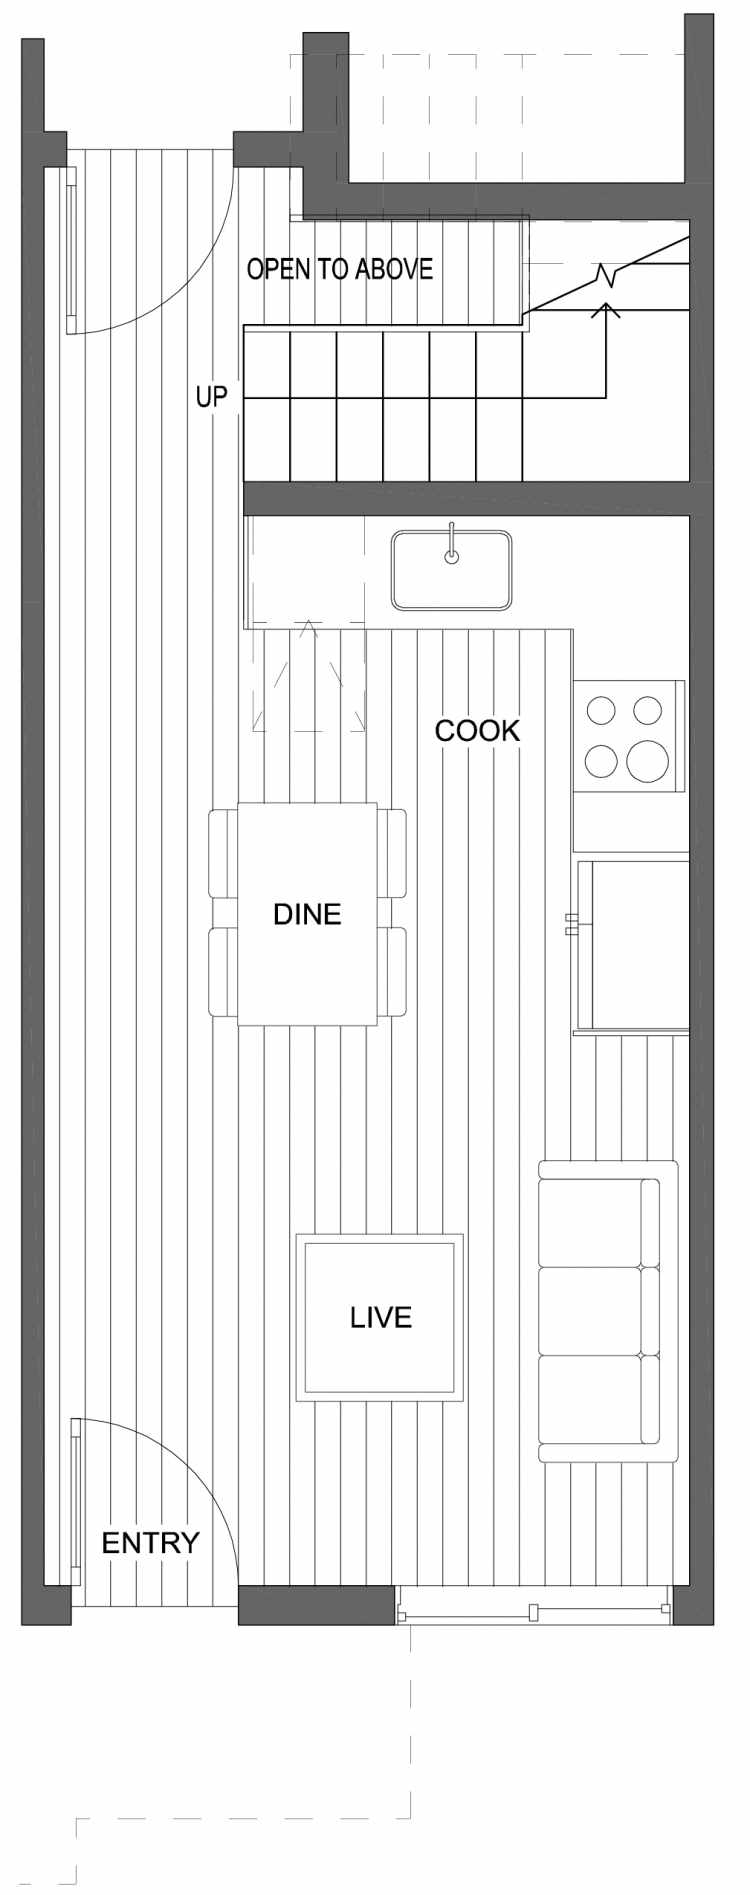 First Floor Plan of 10429G Alderbrook Pl NW, One of the Jasmine Townhomes in the Greenwood Neighborhood of Seattle